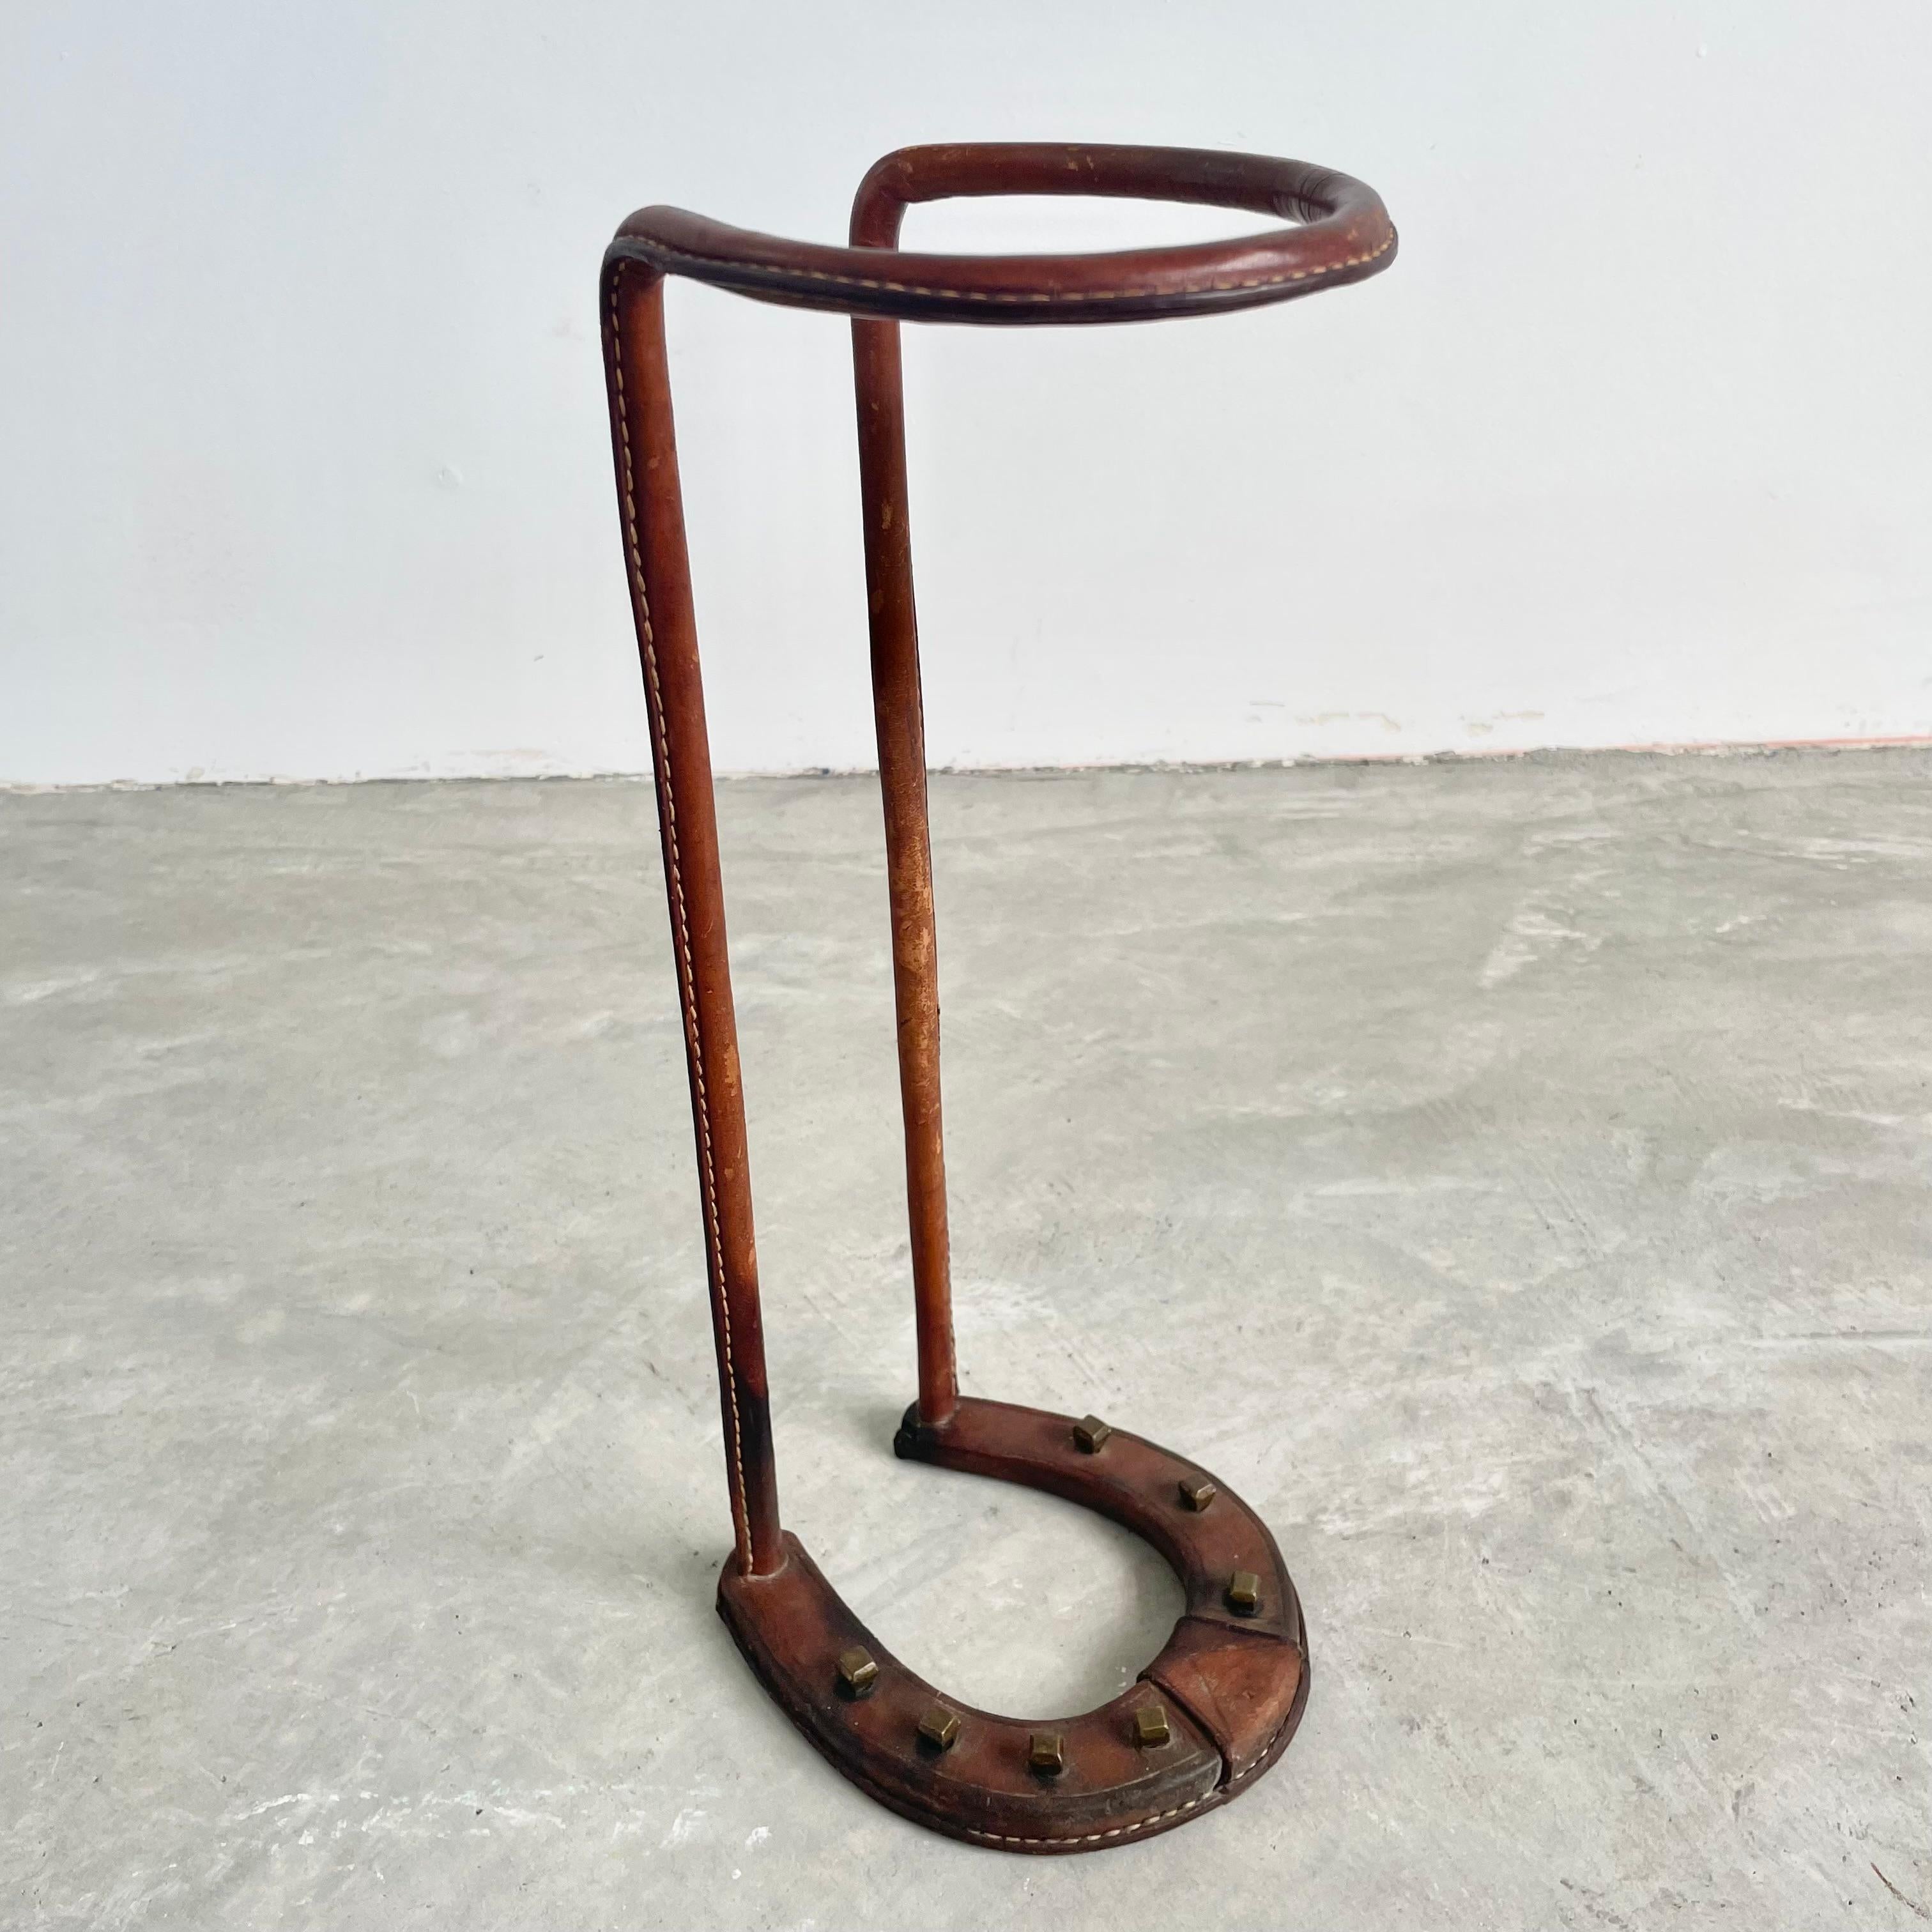 Art Deco Jacques Adnet Leather Umbrella Stand, 1950s France For Sale